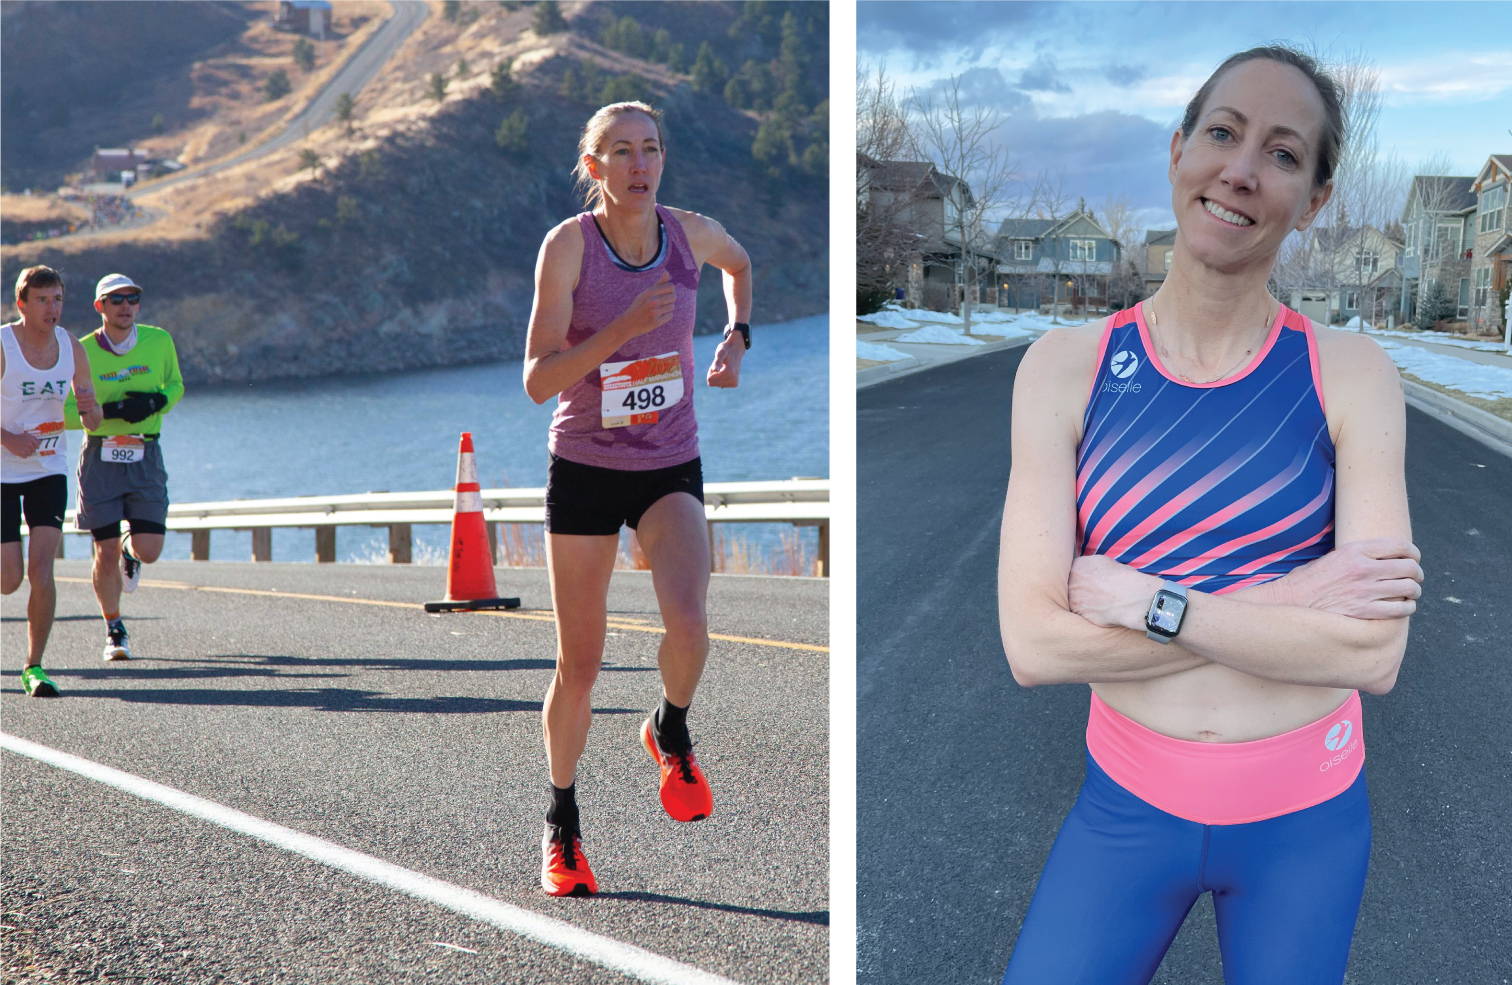 Left: Bri Boehmer racing on the roads in Oiselle apparel. Right: Portrait of Bri smiling in her Oiselle uniform.